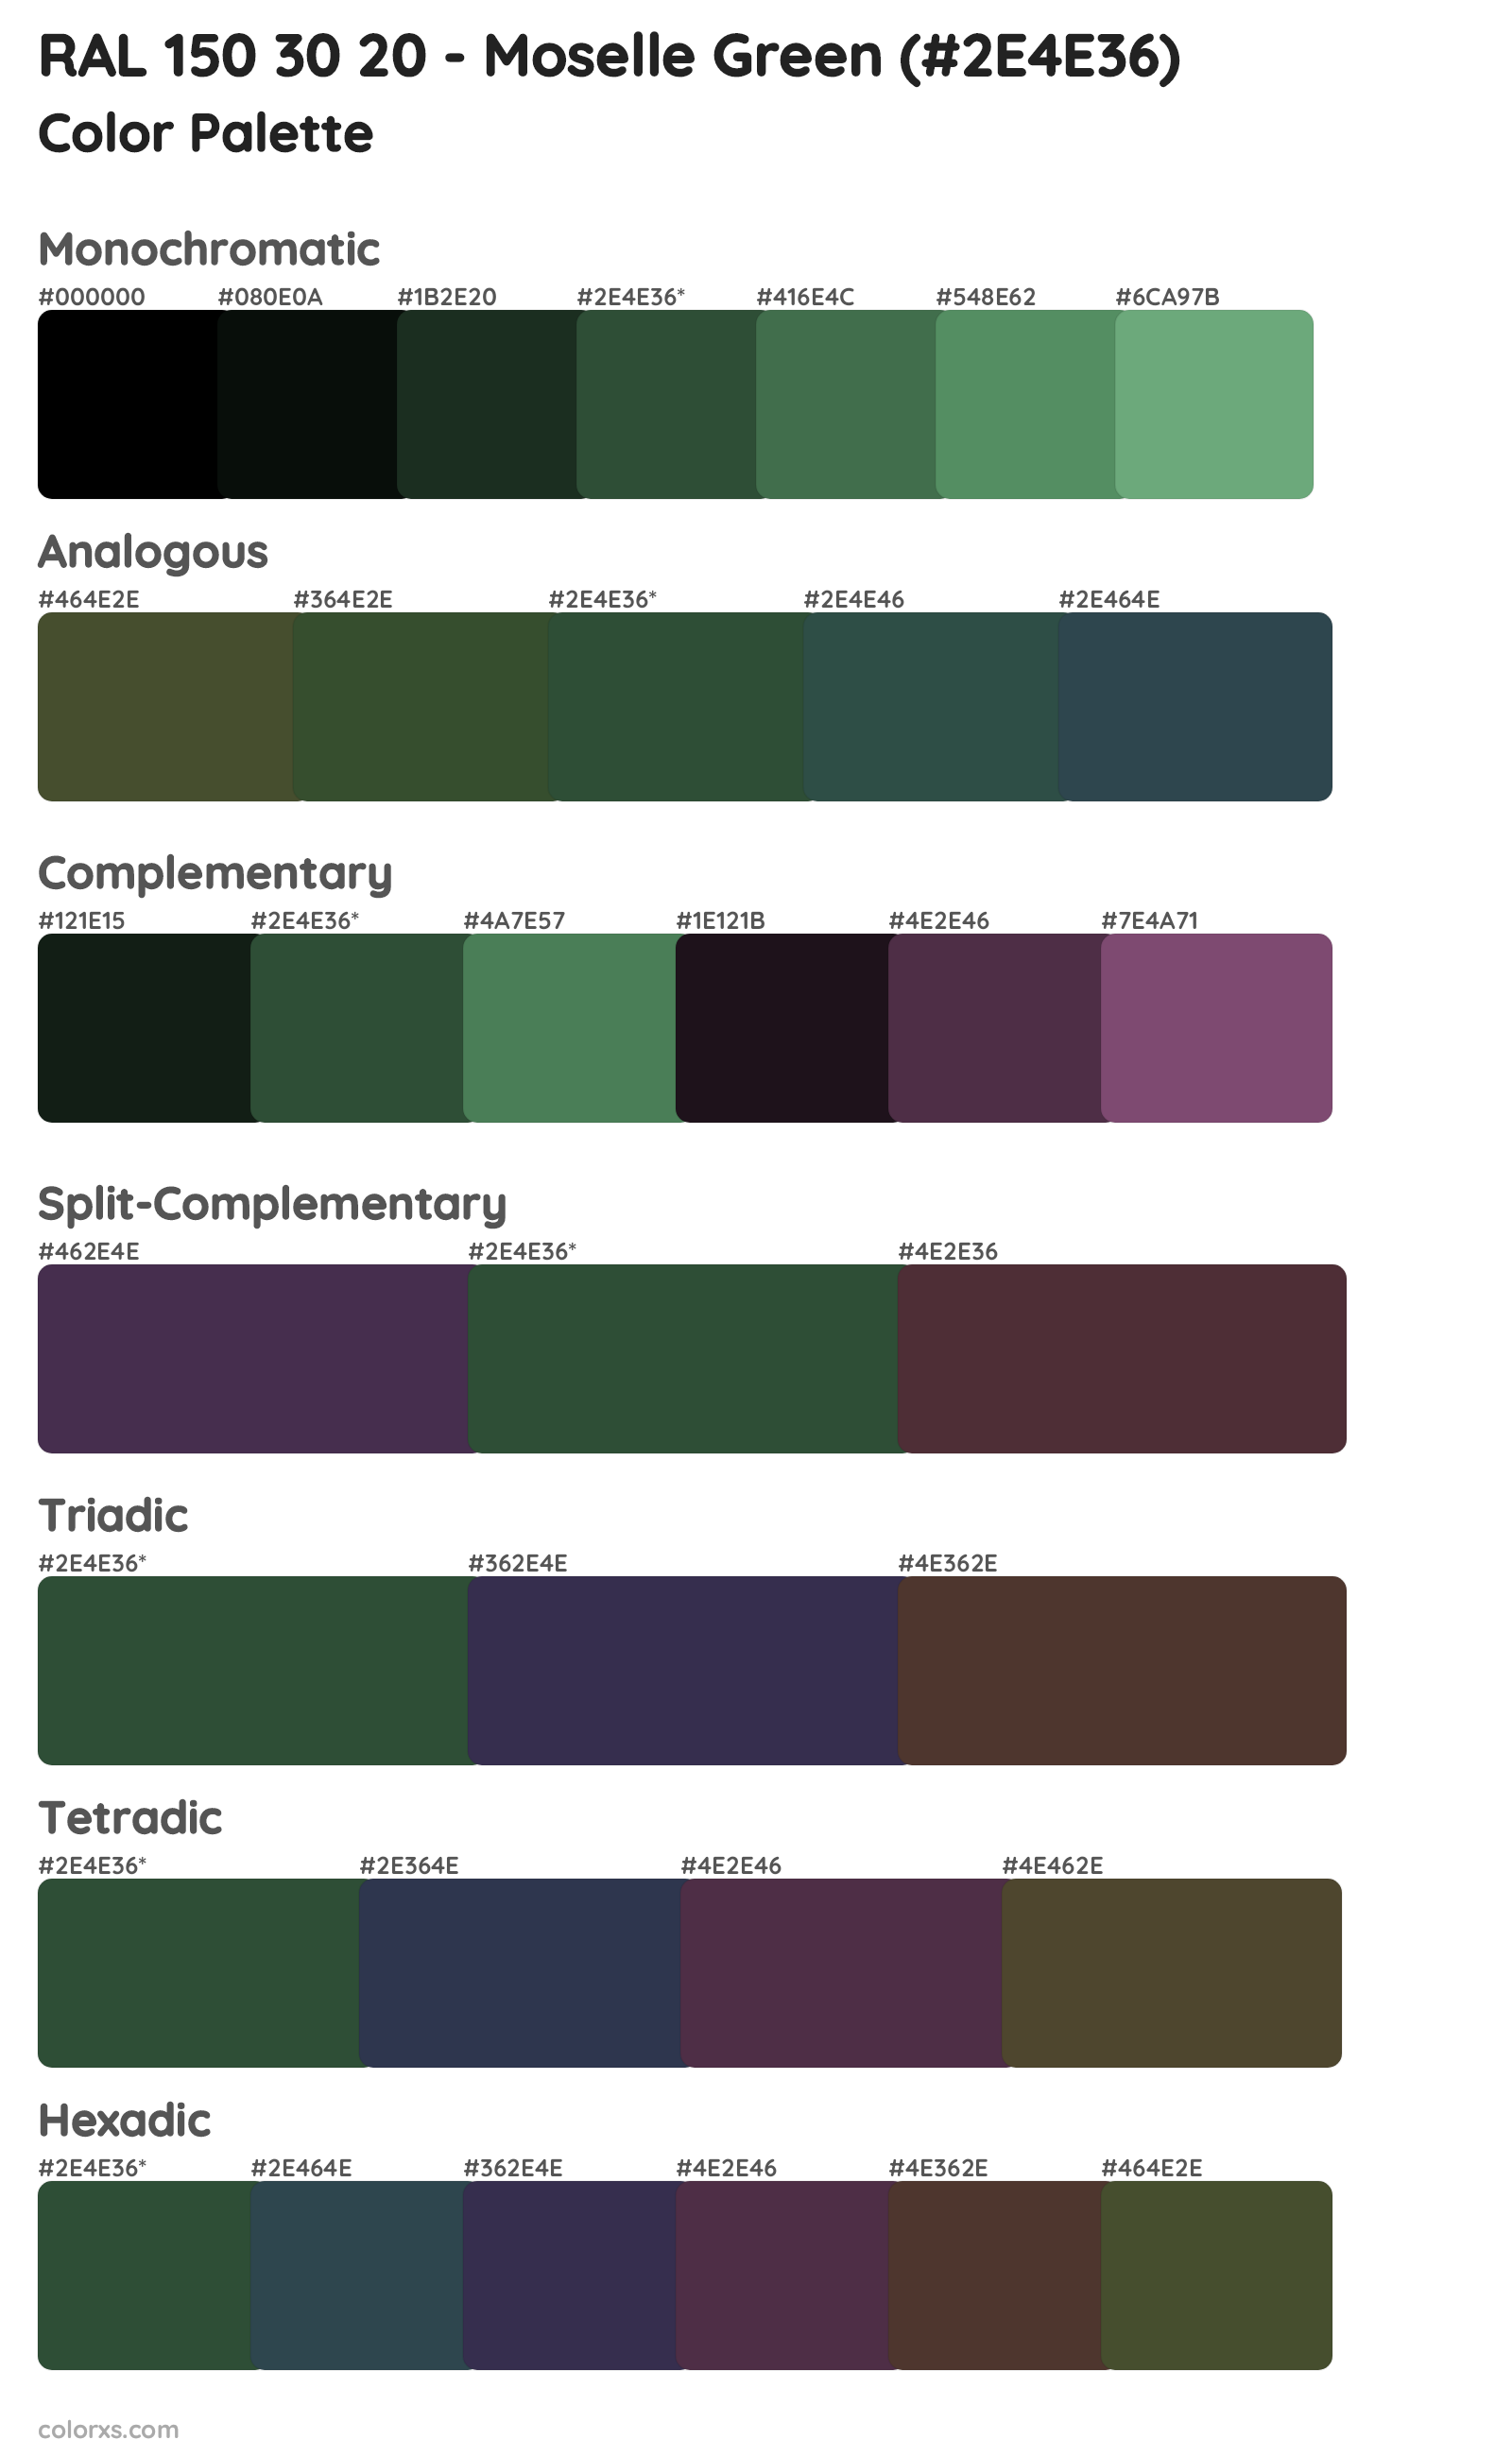 RAL 150 30 20 - Moselle Green Color Scheme Palettes